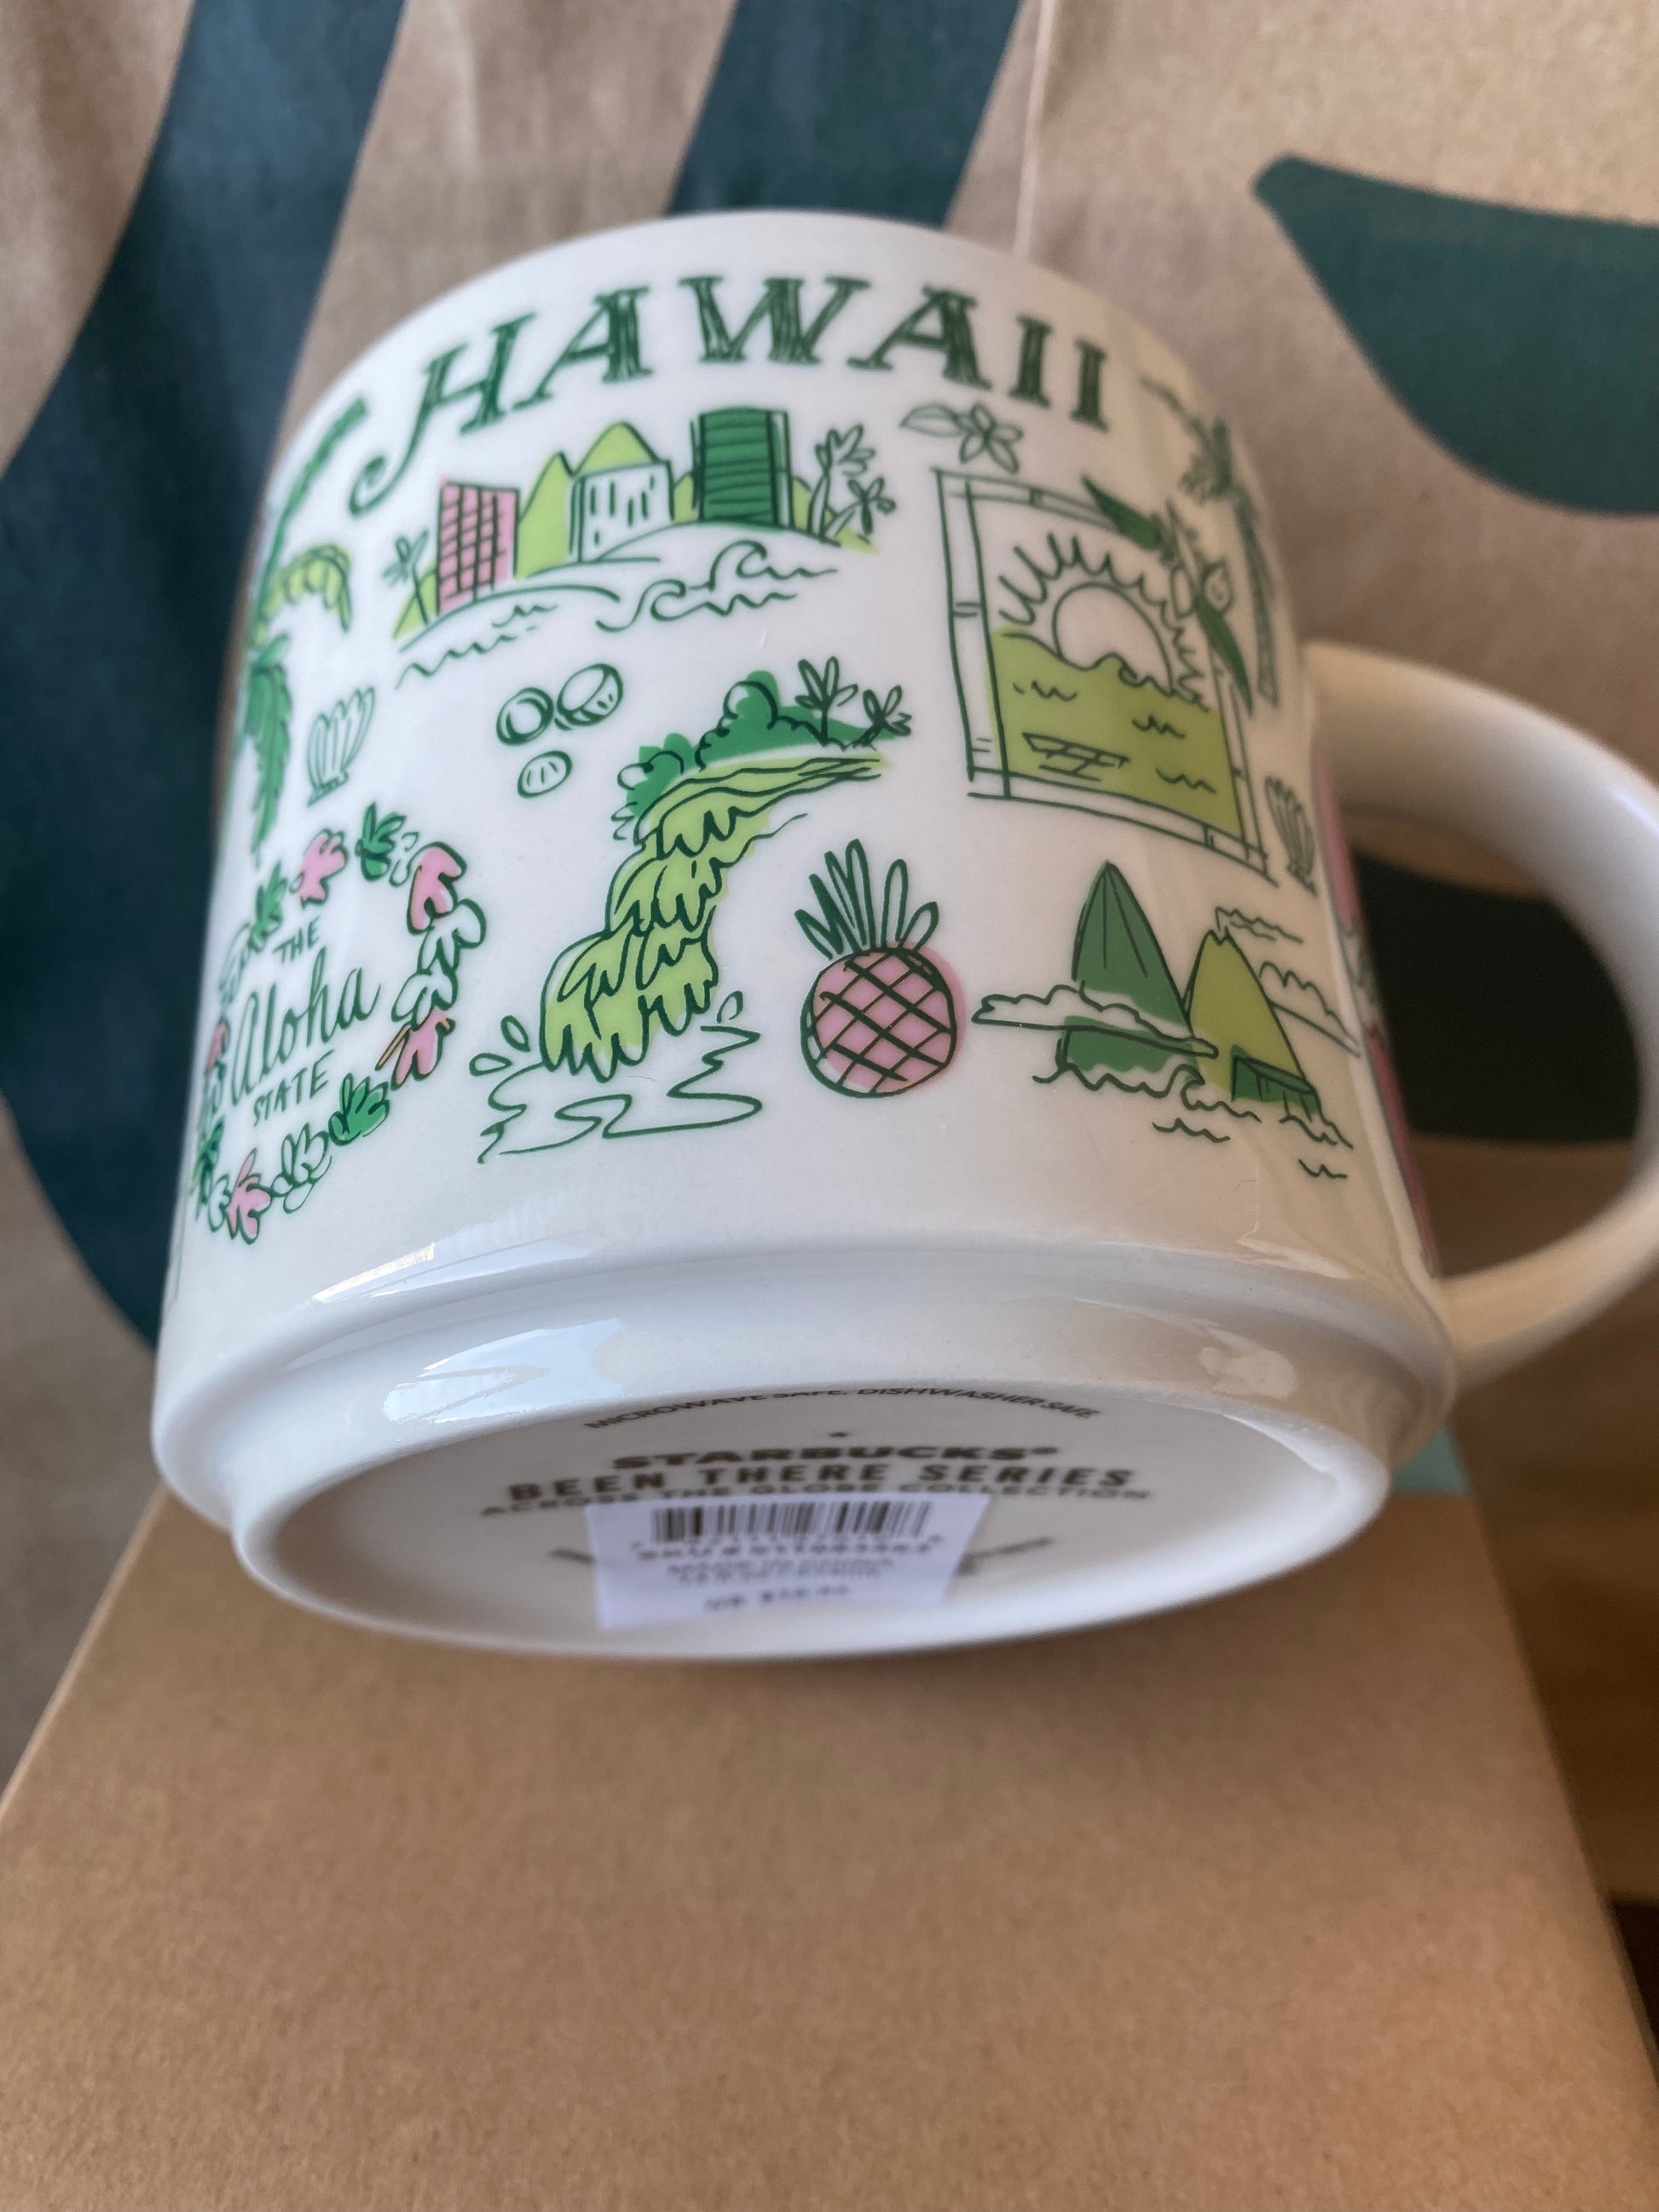 The Hawaiian coffee cup collection - Picture of Starbucks, Maui